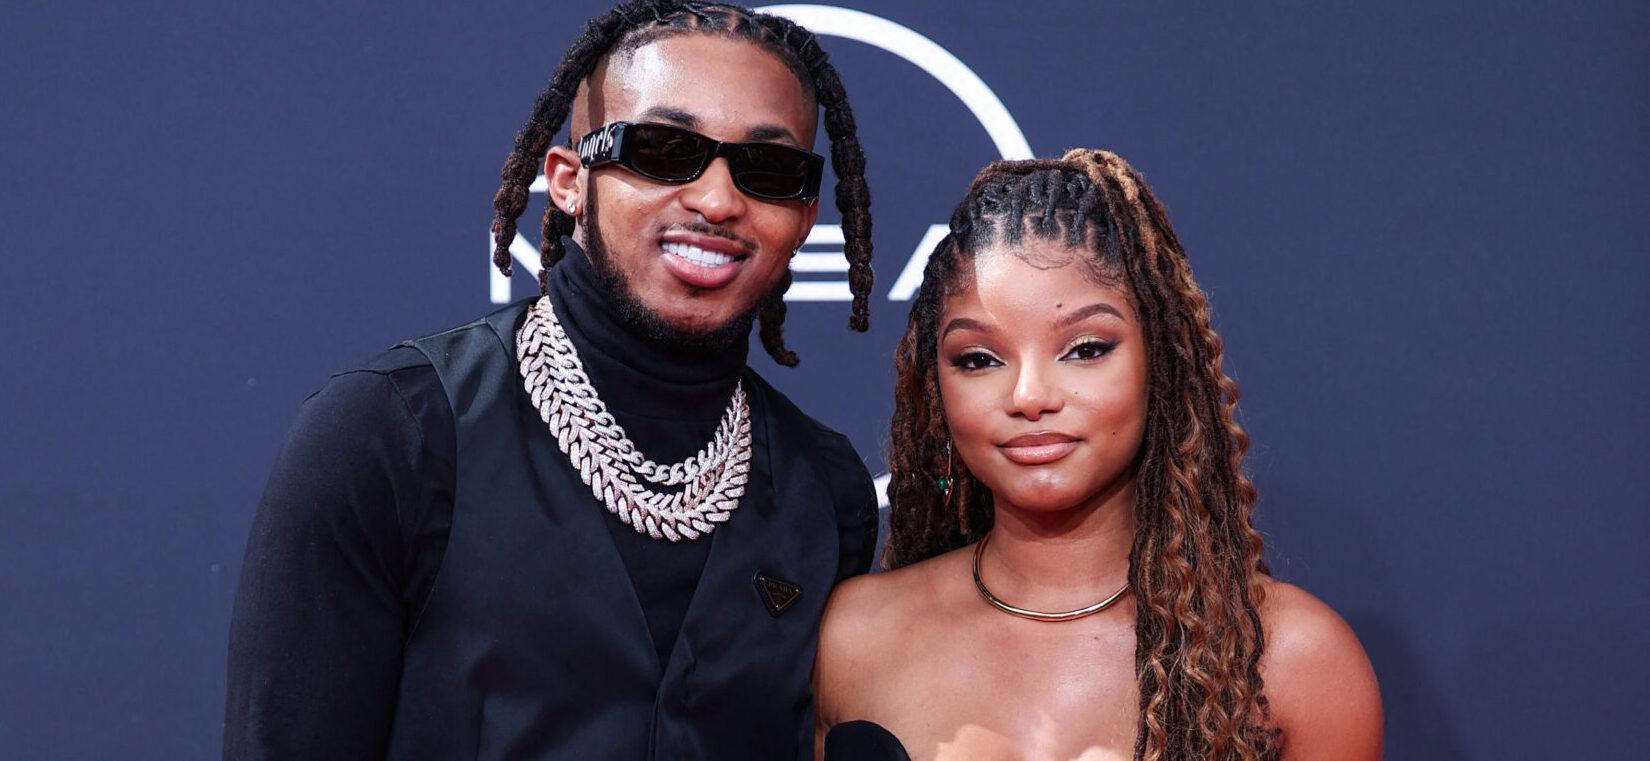 Halle Bailey’s Rapper Boyfriend Disses Her In New Song Over Onscreen Kiss